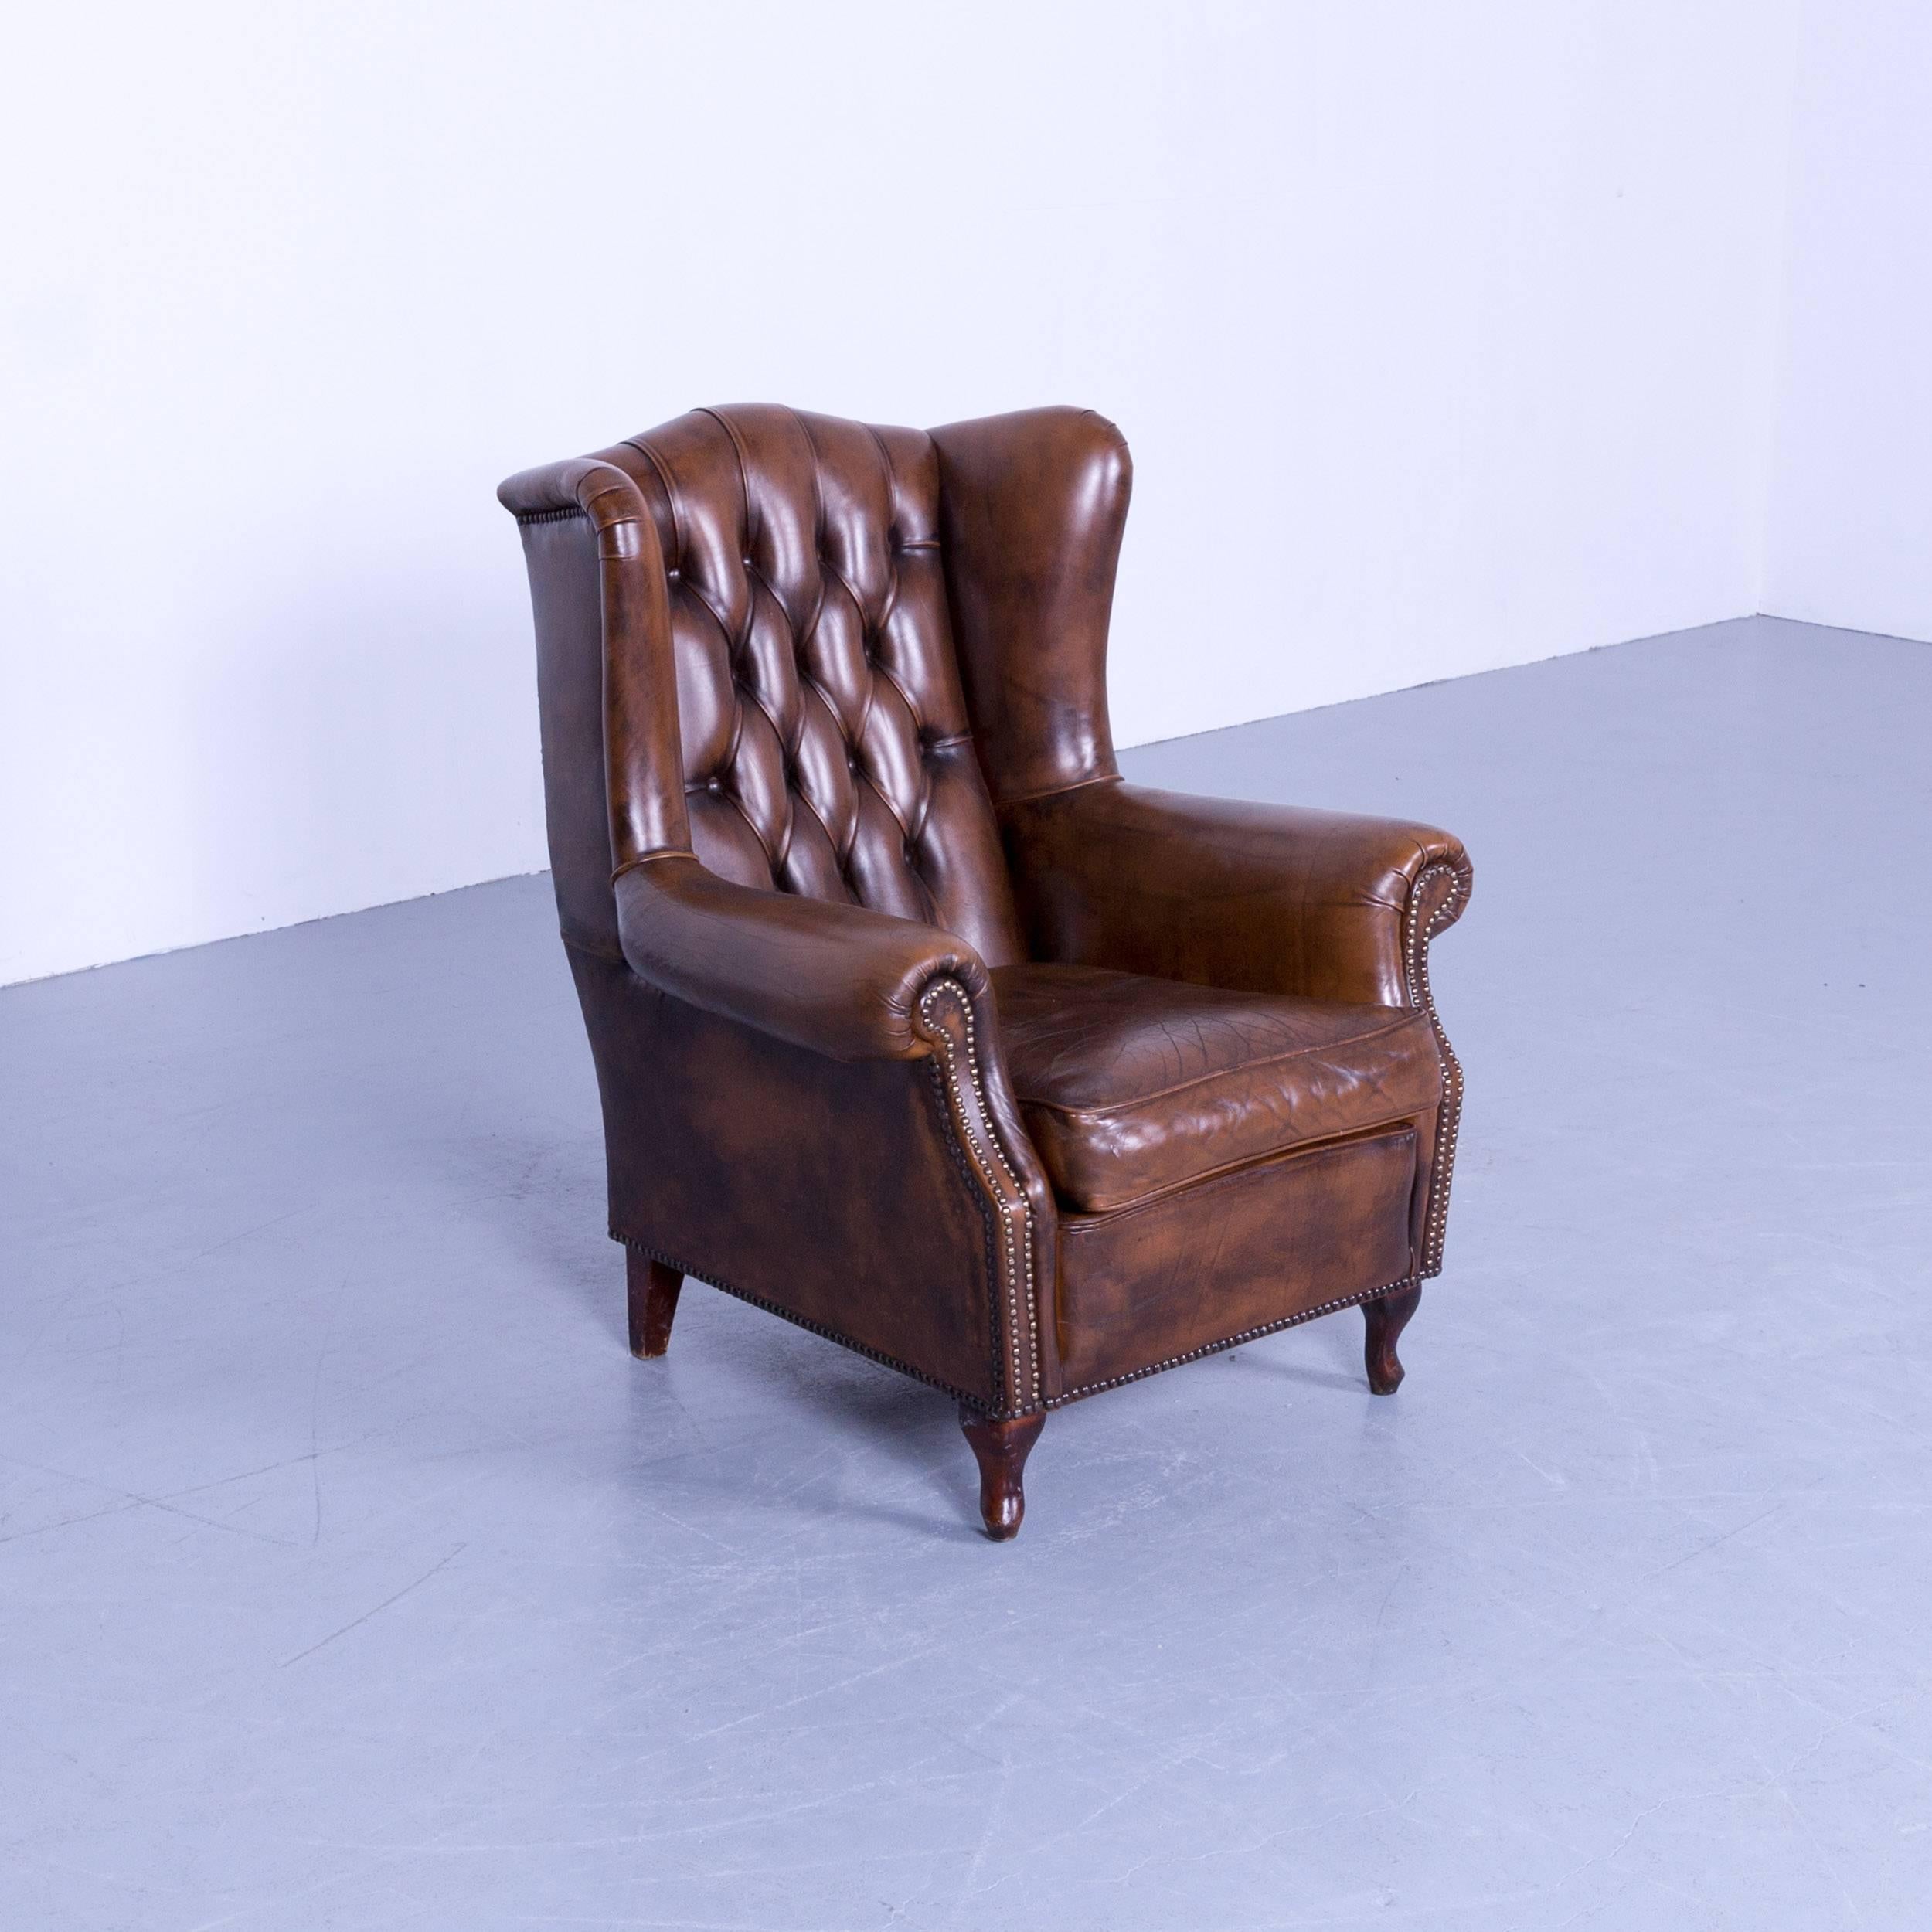 German Chesterfield Armchair Brown Cocker Leather Buttoned Vintage Retro Wood Handmade For Sale